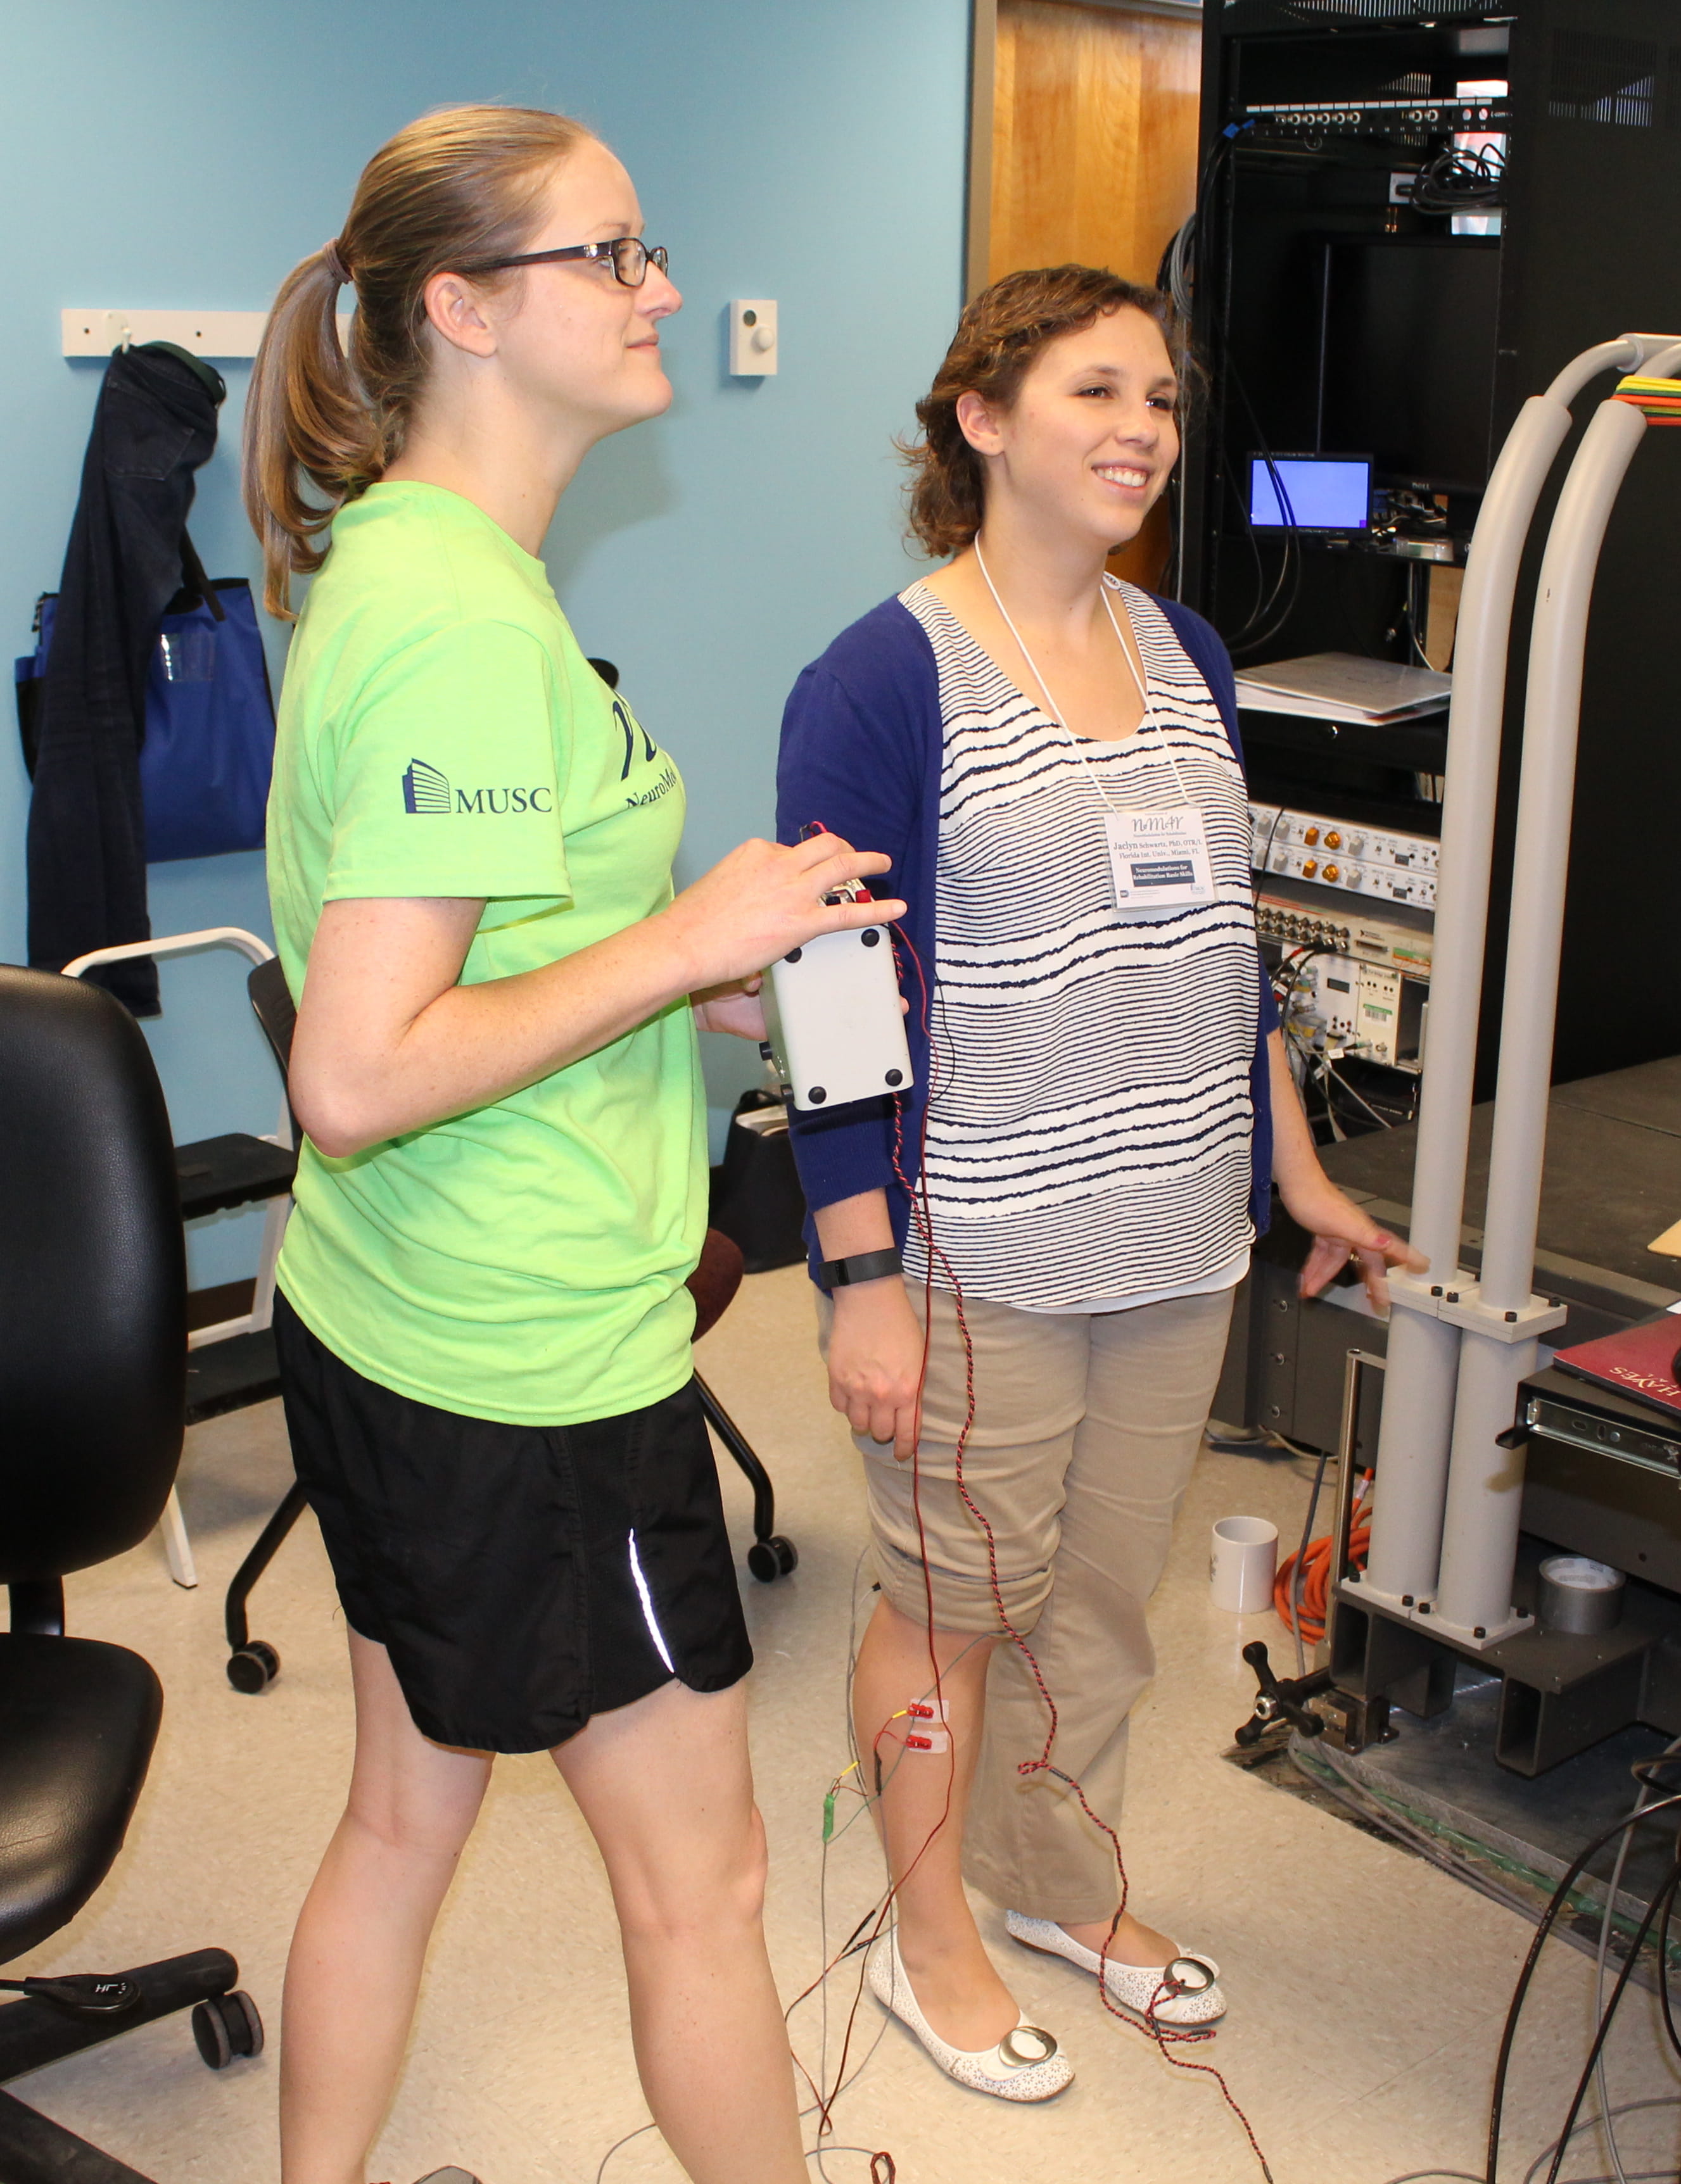 Workshop participants demonstrating Operant Conditioning of EMG-evoked potential